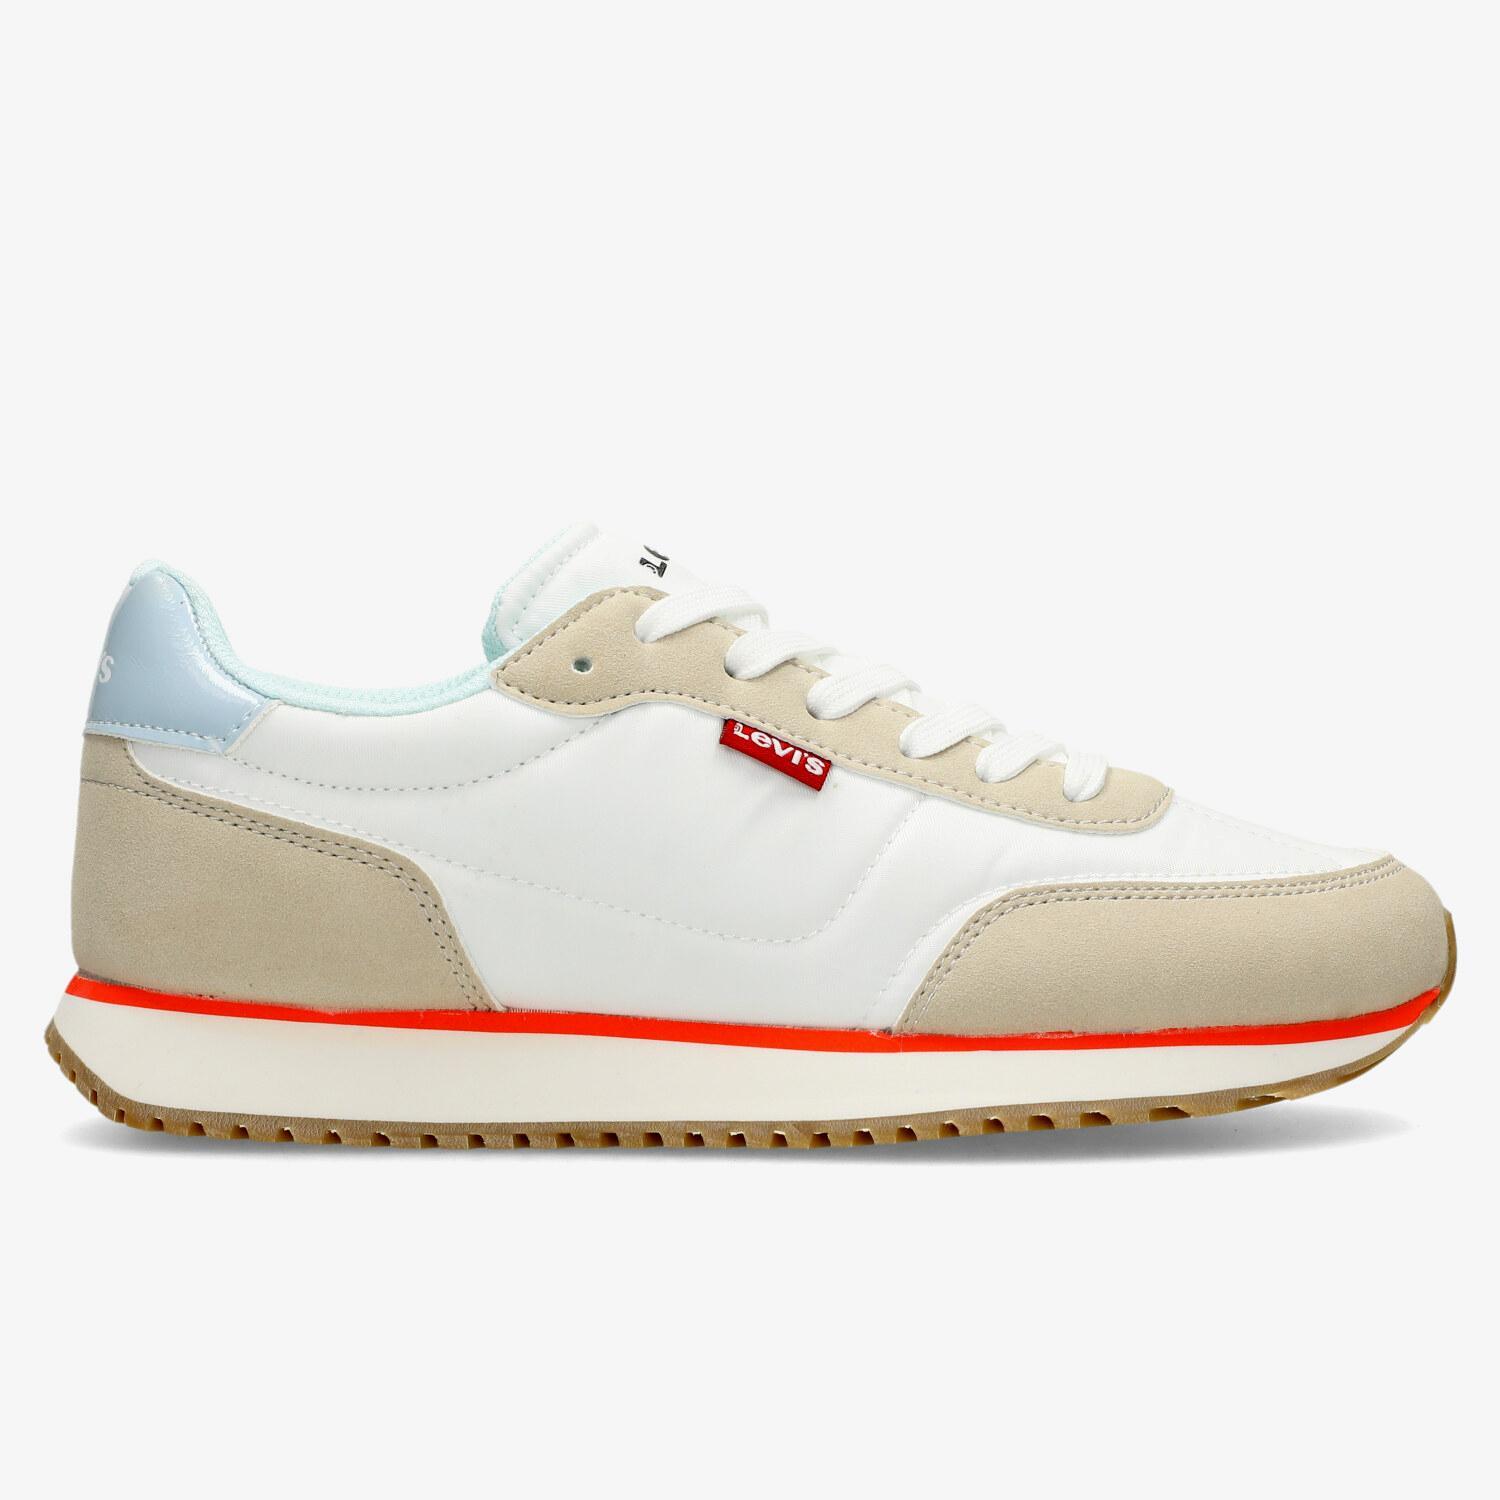 Levi's Stag Runner - Branco - Sapatilhas Mulher tamanho 41 product